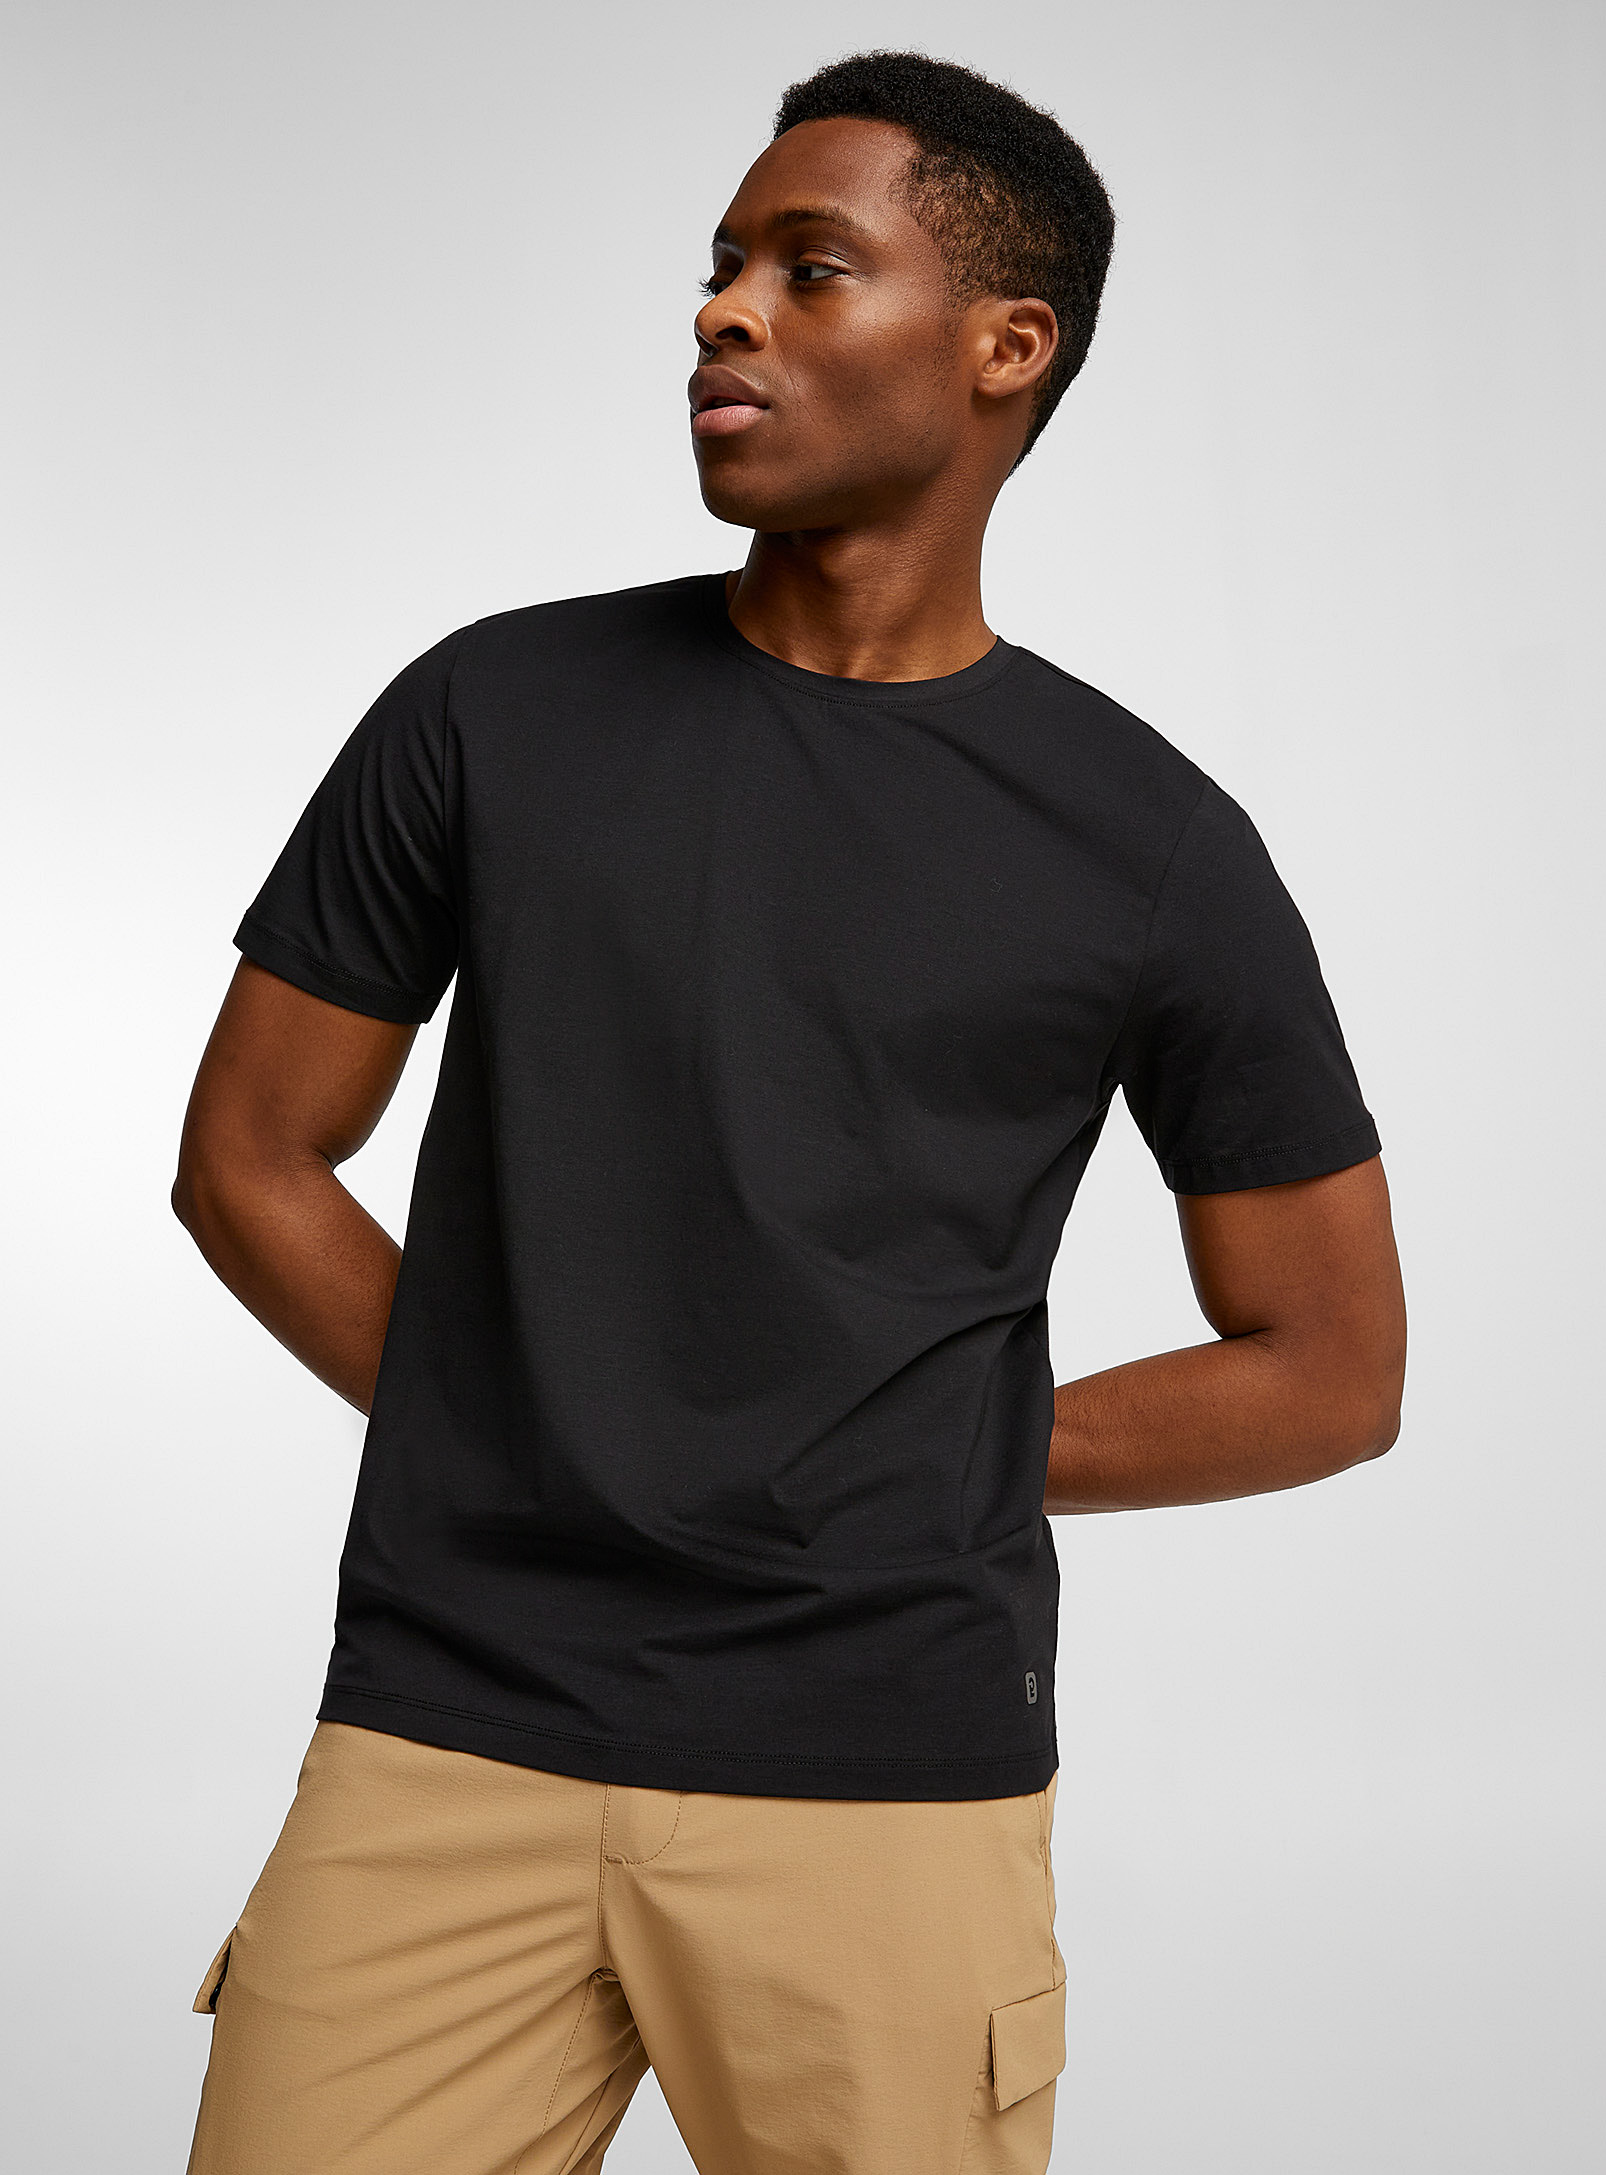 I.fiv5 Cotton-lyocell Stretch Tee In Black